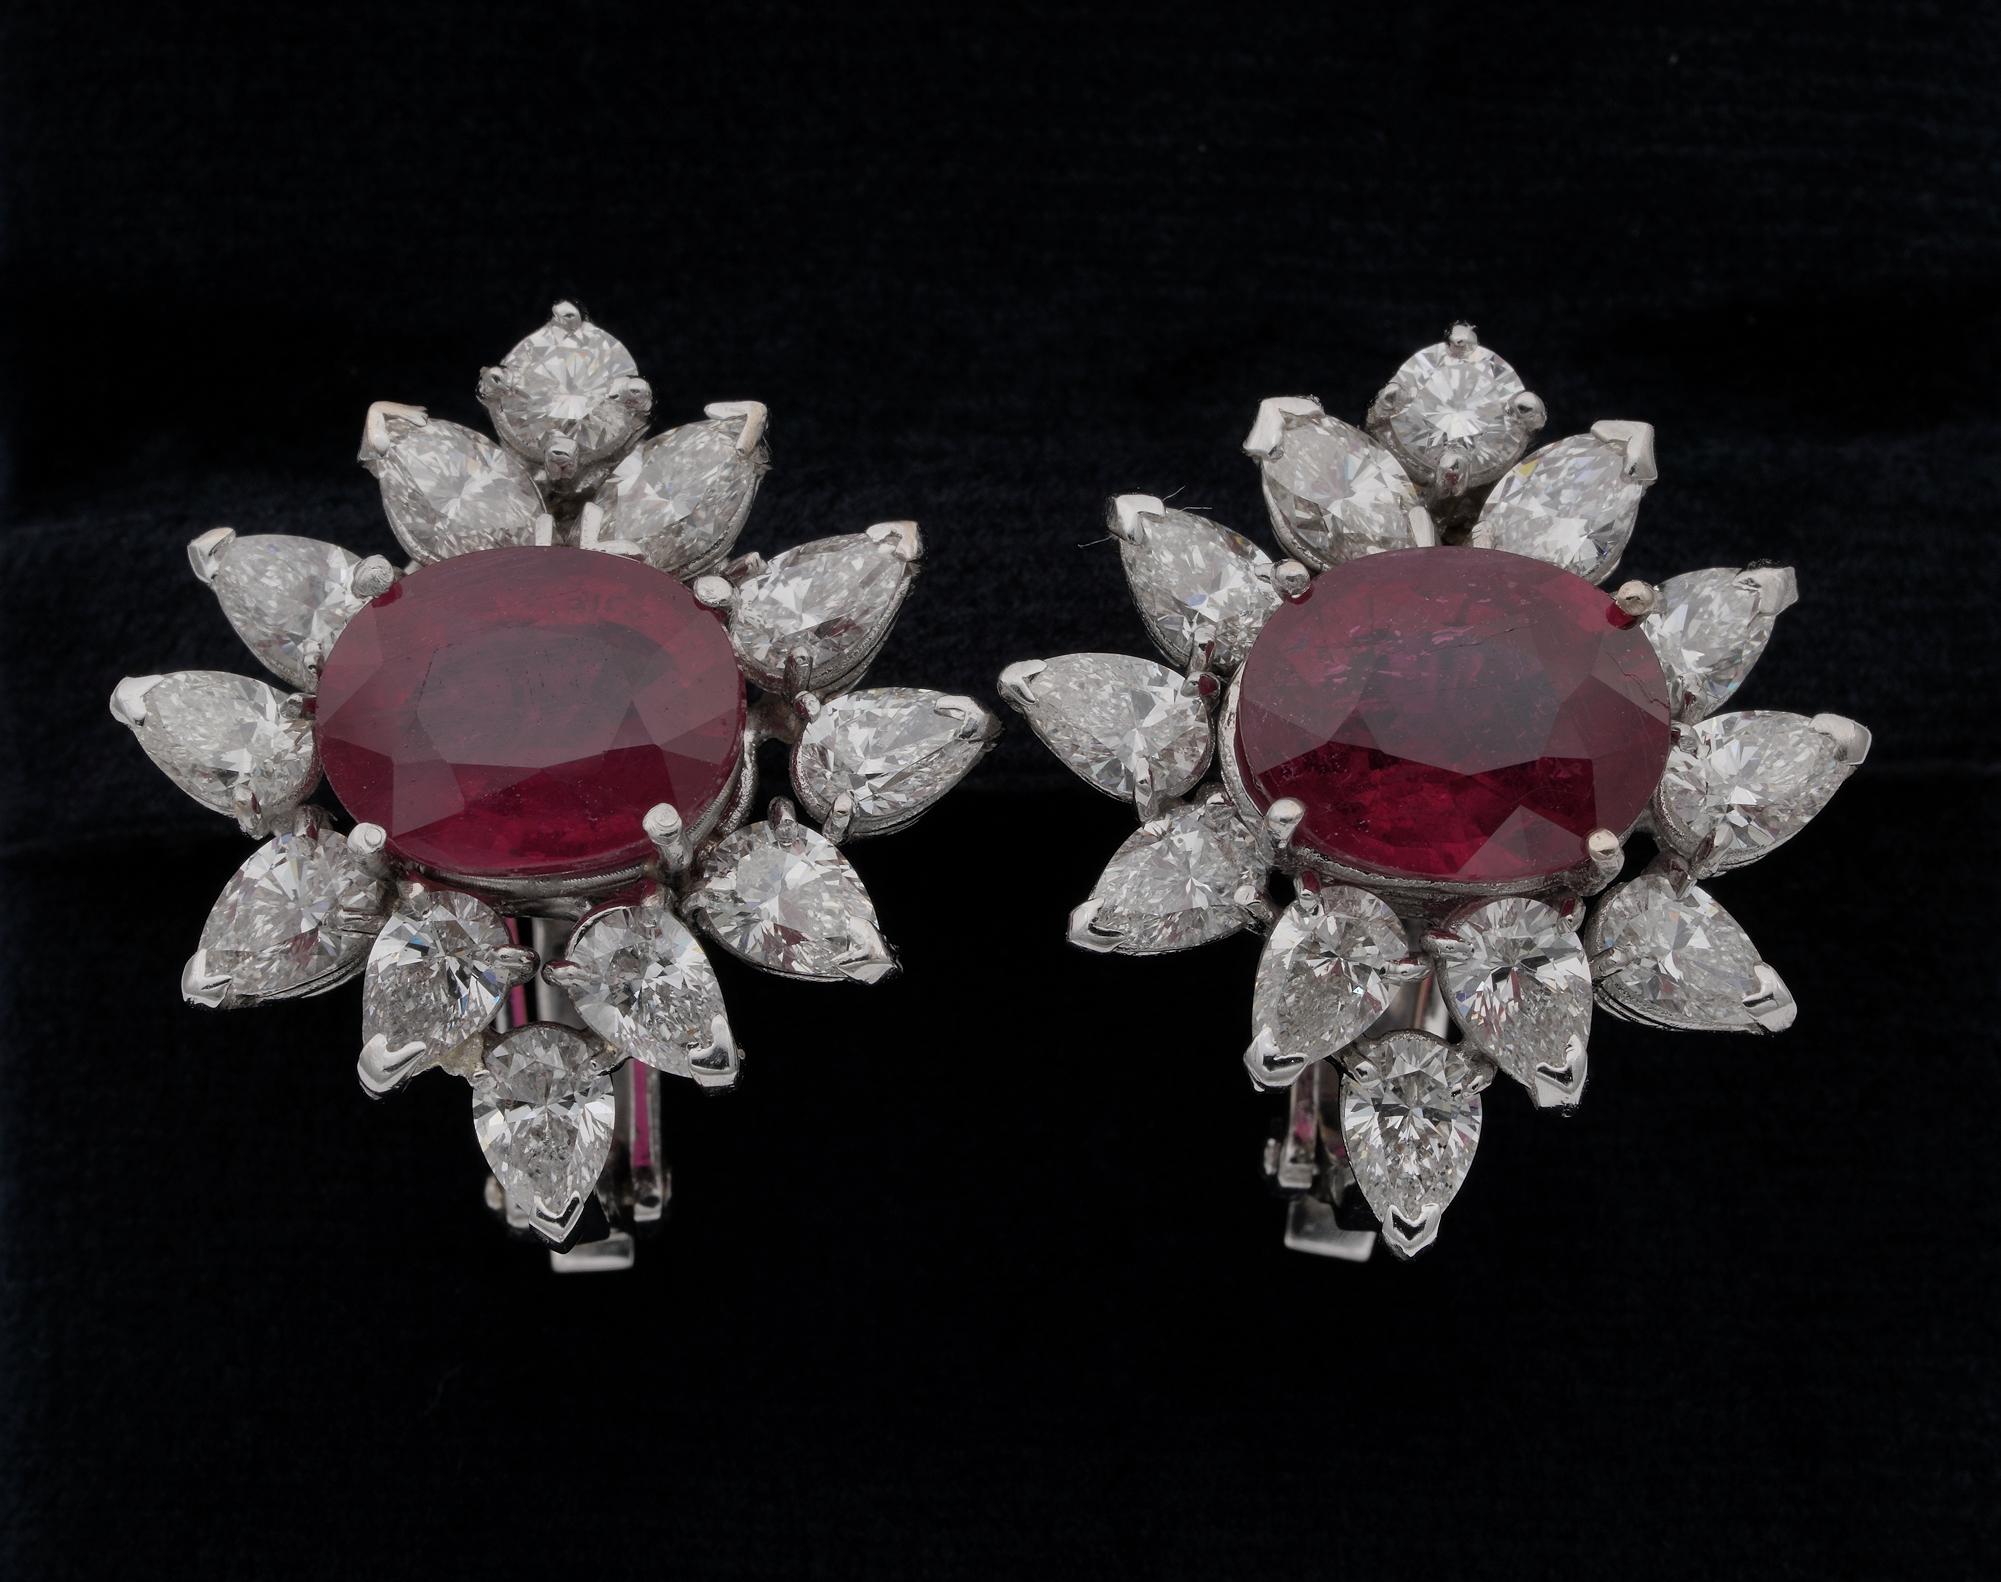 Red Carpet

Magnificent pair of mid century earrings expressing in full the glam of the 50's
Large, relevant, oversized, beautifully designed in a cluster of finest gemstones to please the viewer with a blaze of Diamonds with Red Core
Hand crafted